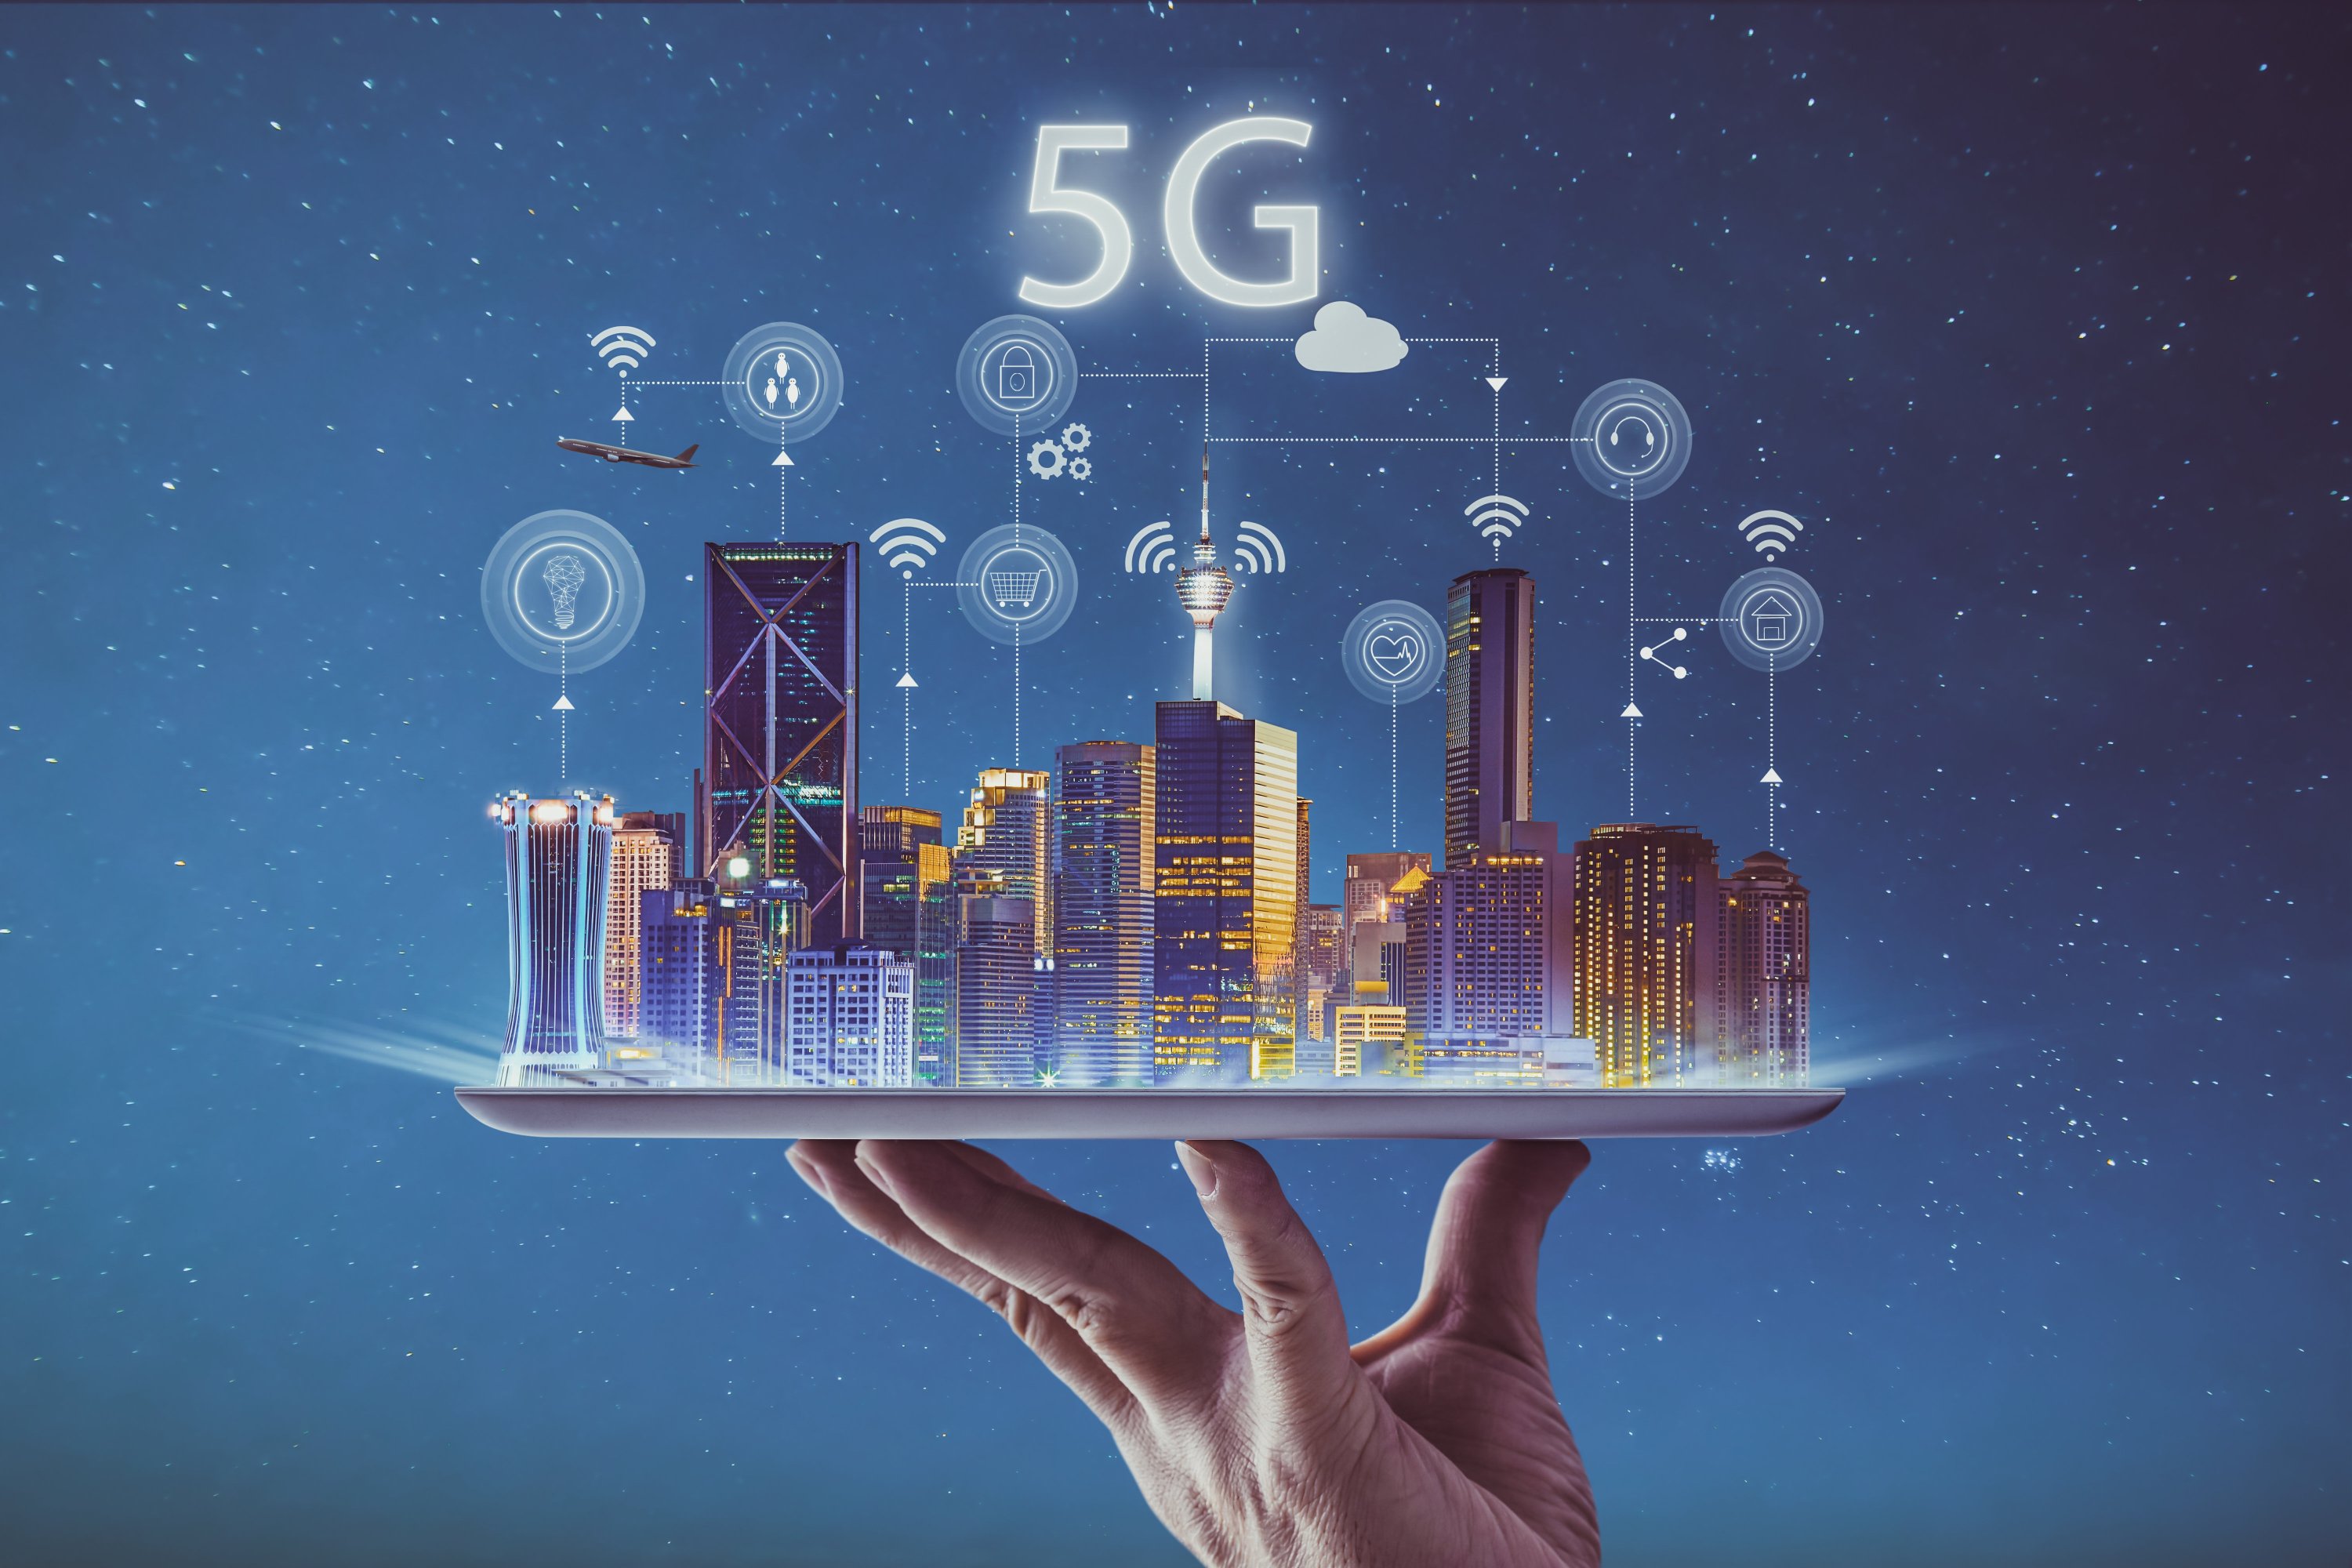 Debunking Tech Myths and Misconceptions: Mythbusting 5G Safety Concerns